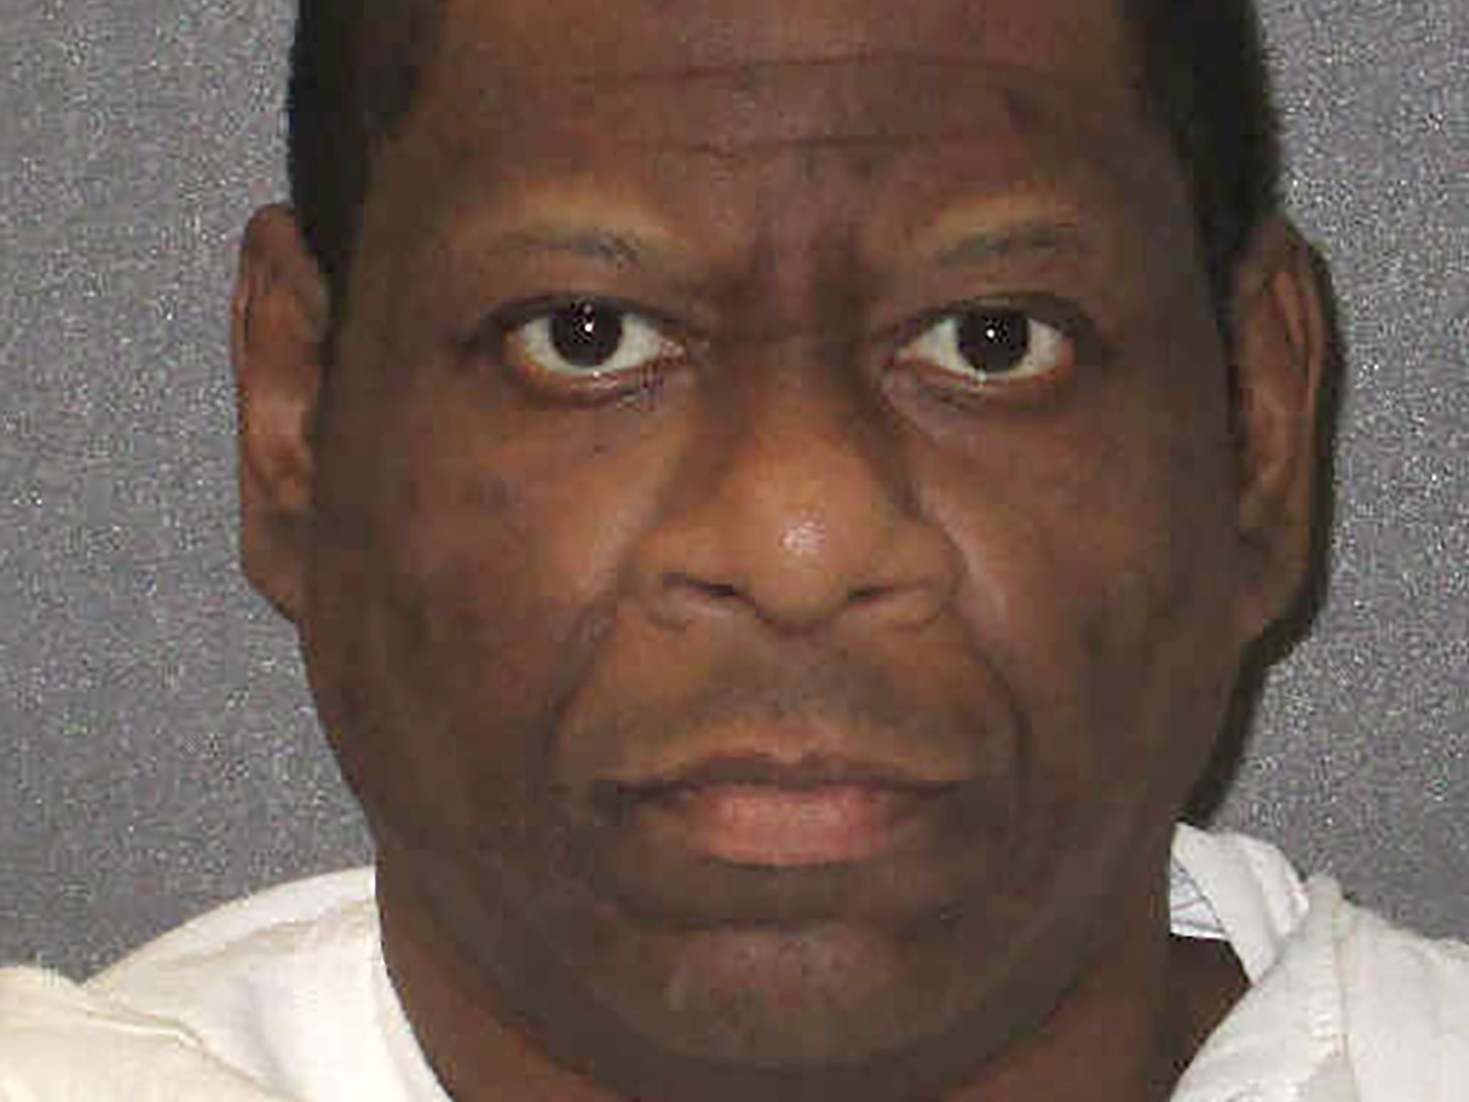 Texas death row inmate Rodney Reed has been denied his request for a new trial